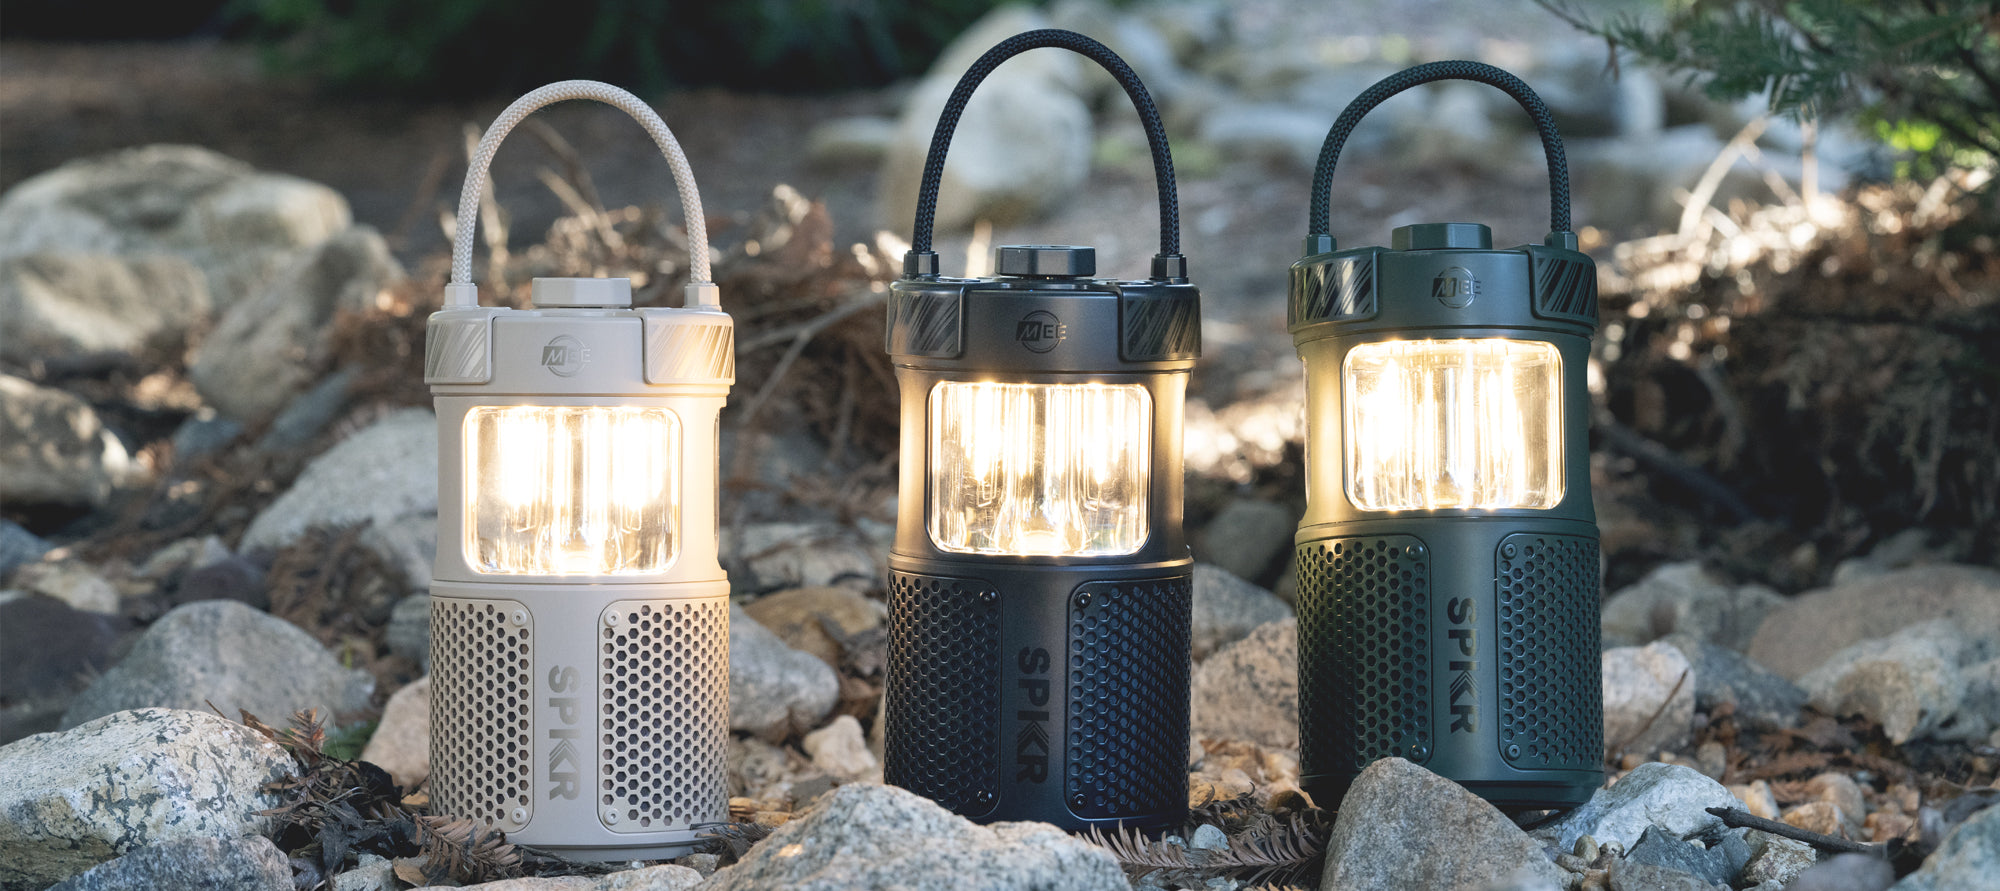 Three portable led lanterns, in cream, black, and green, illuminated and standing on a rocky ground with sparse vegetation in the background.